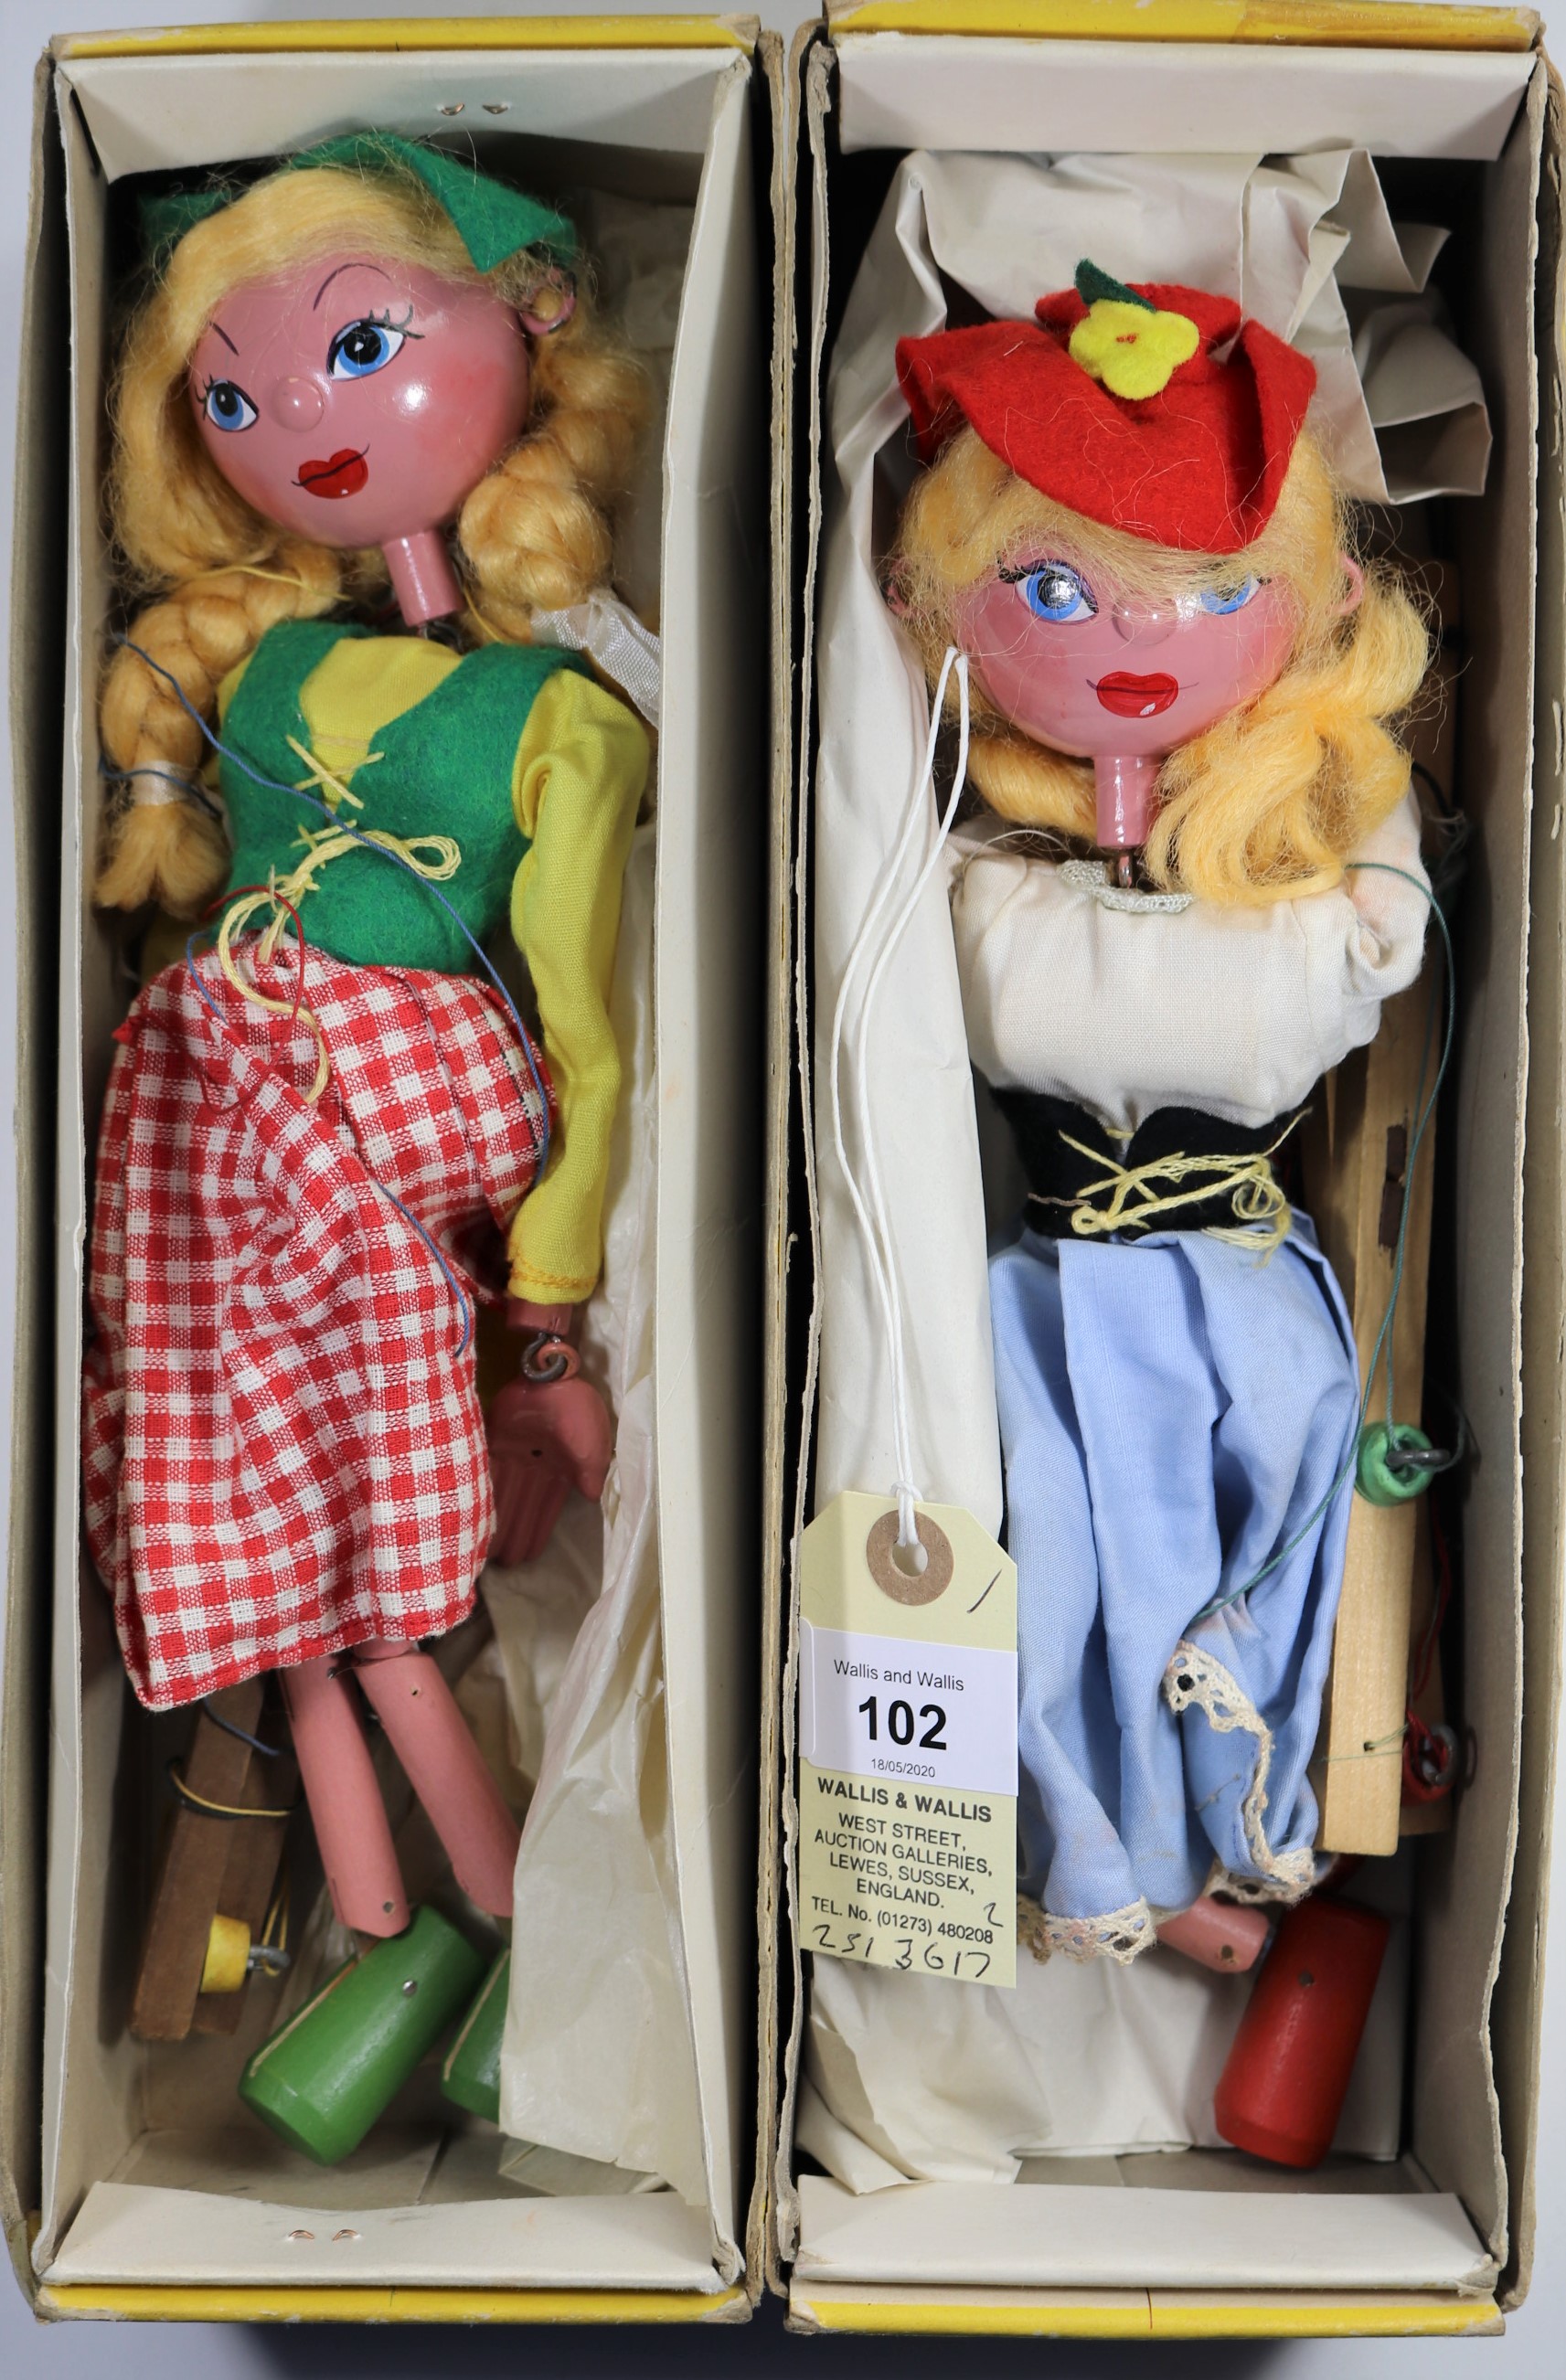 2 Pelham Puppets. Both Standard examples, one looks to be the Dutch girl and the other the gypsy